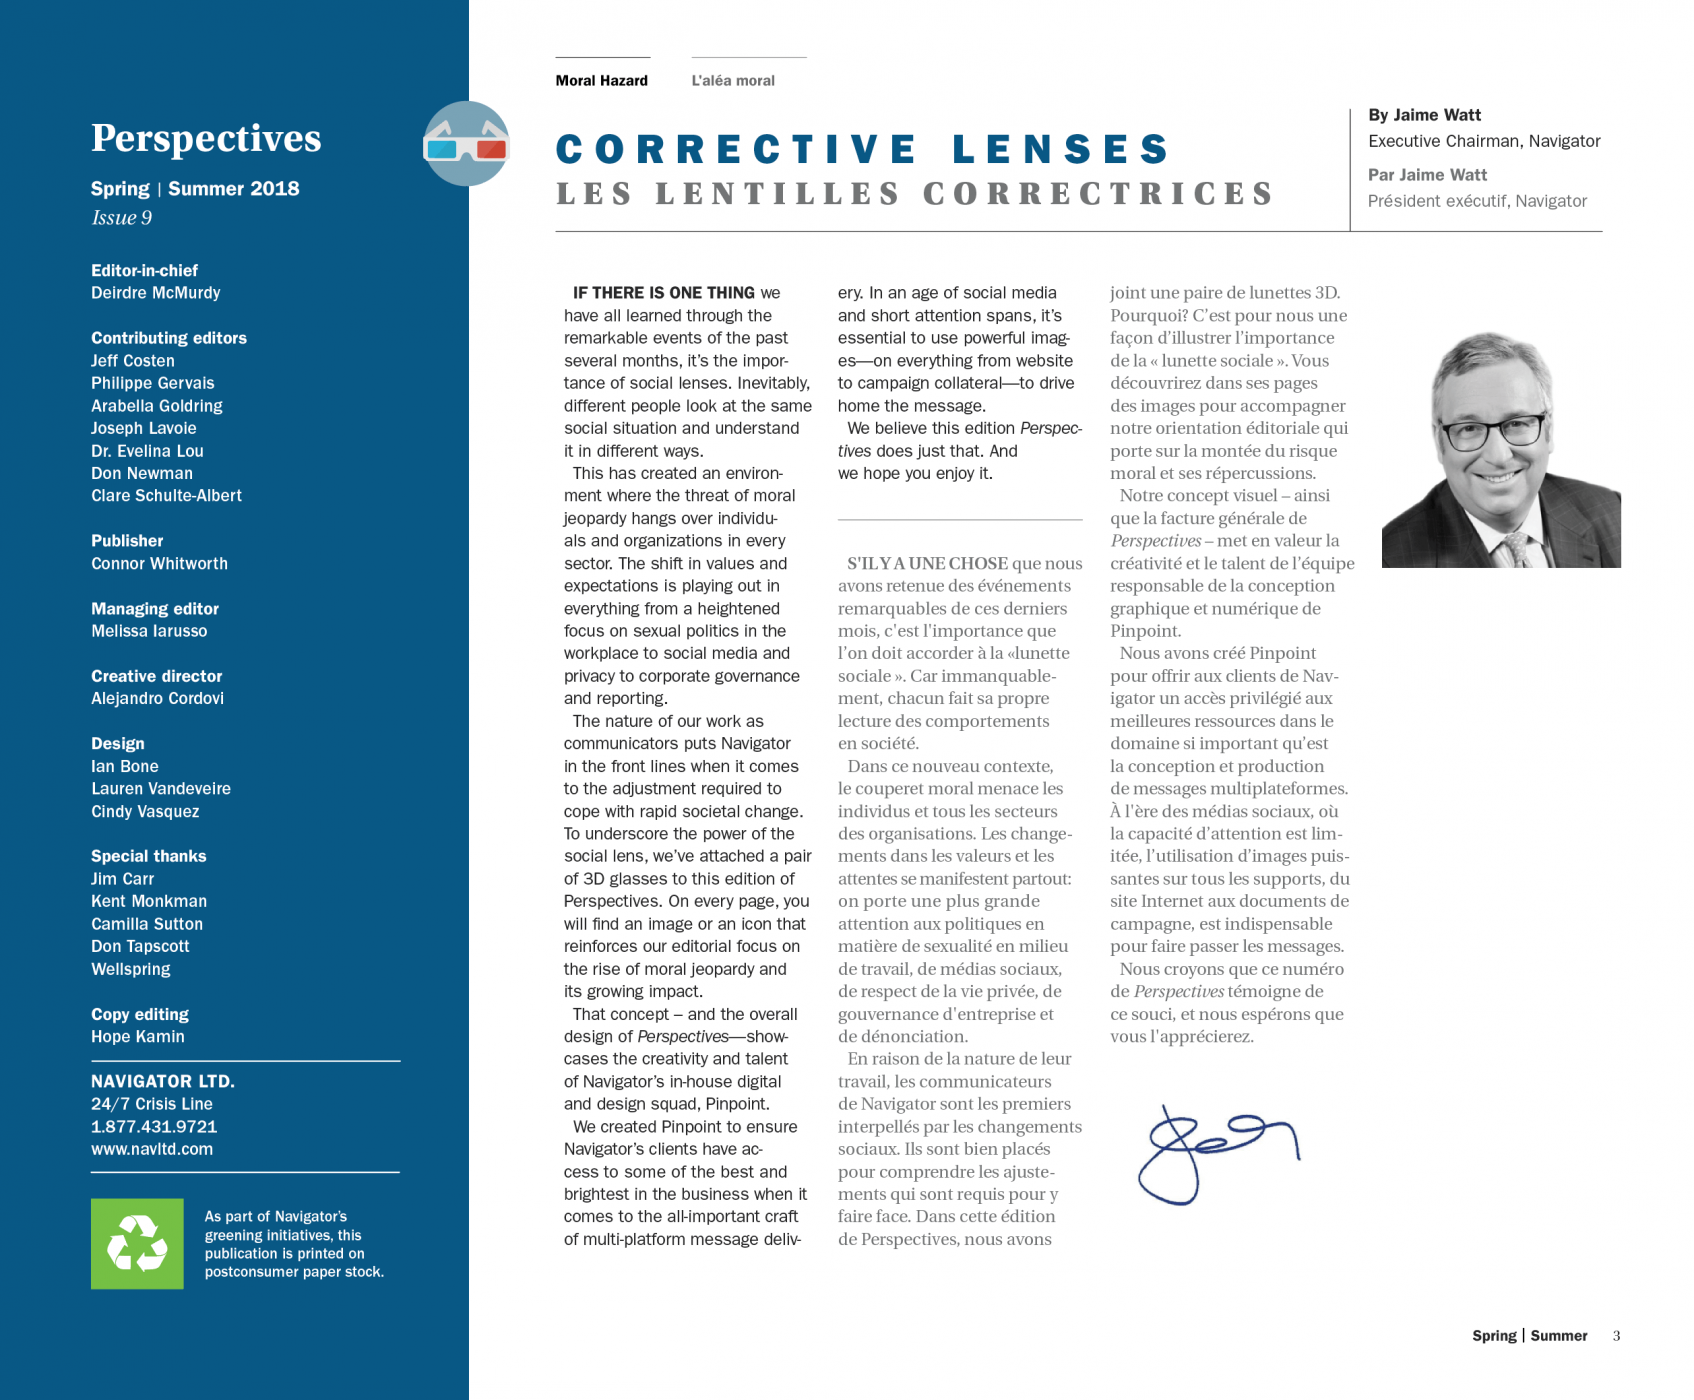 Perspectives issue 9 article 1